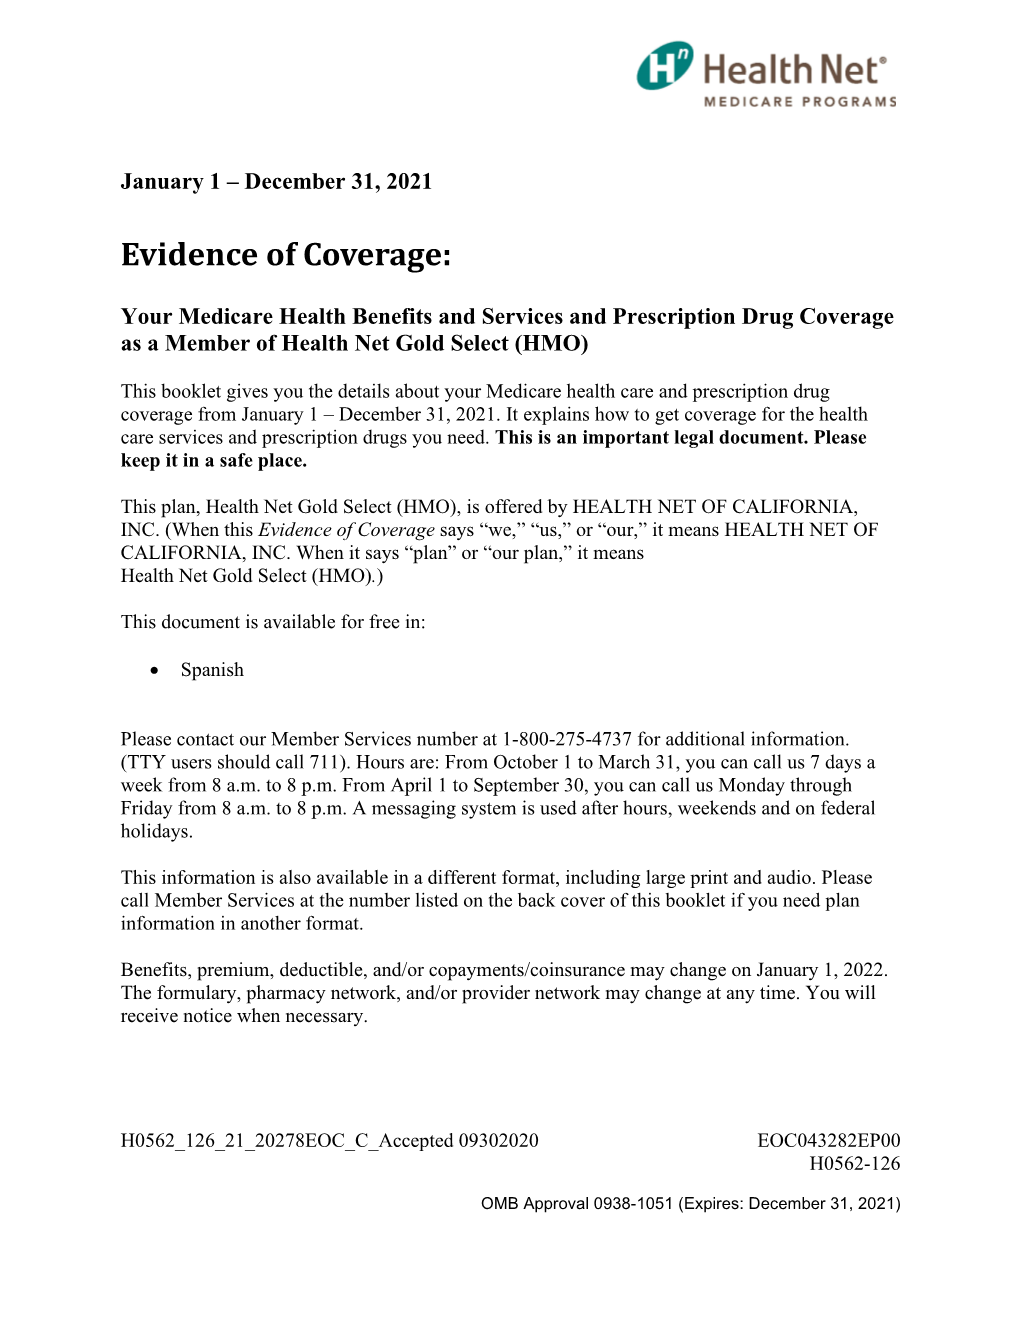 Evidence of Coverage, H0562-126